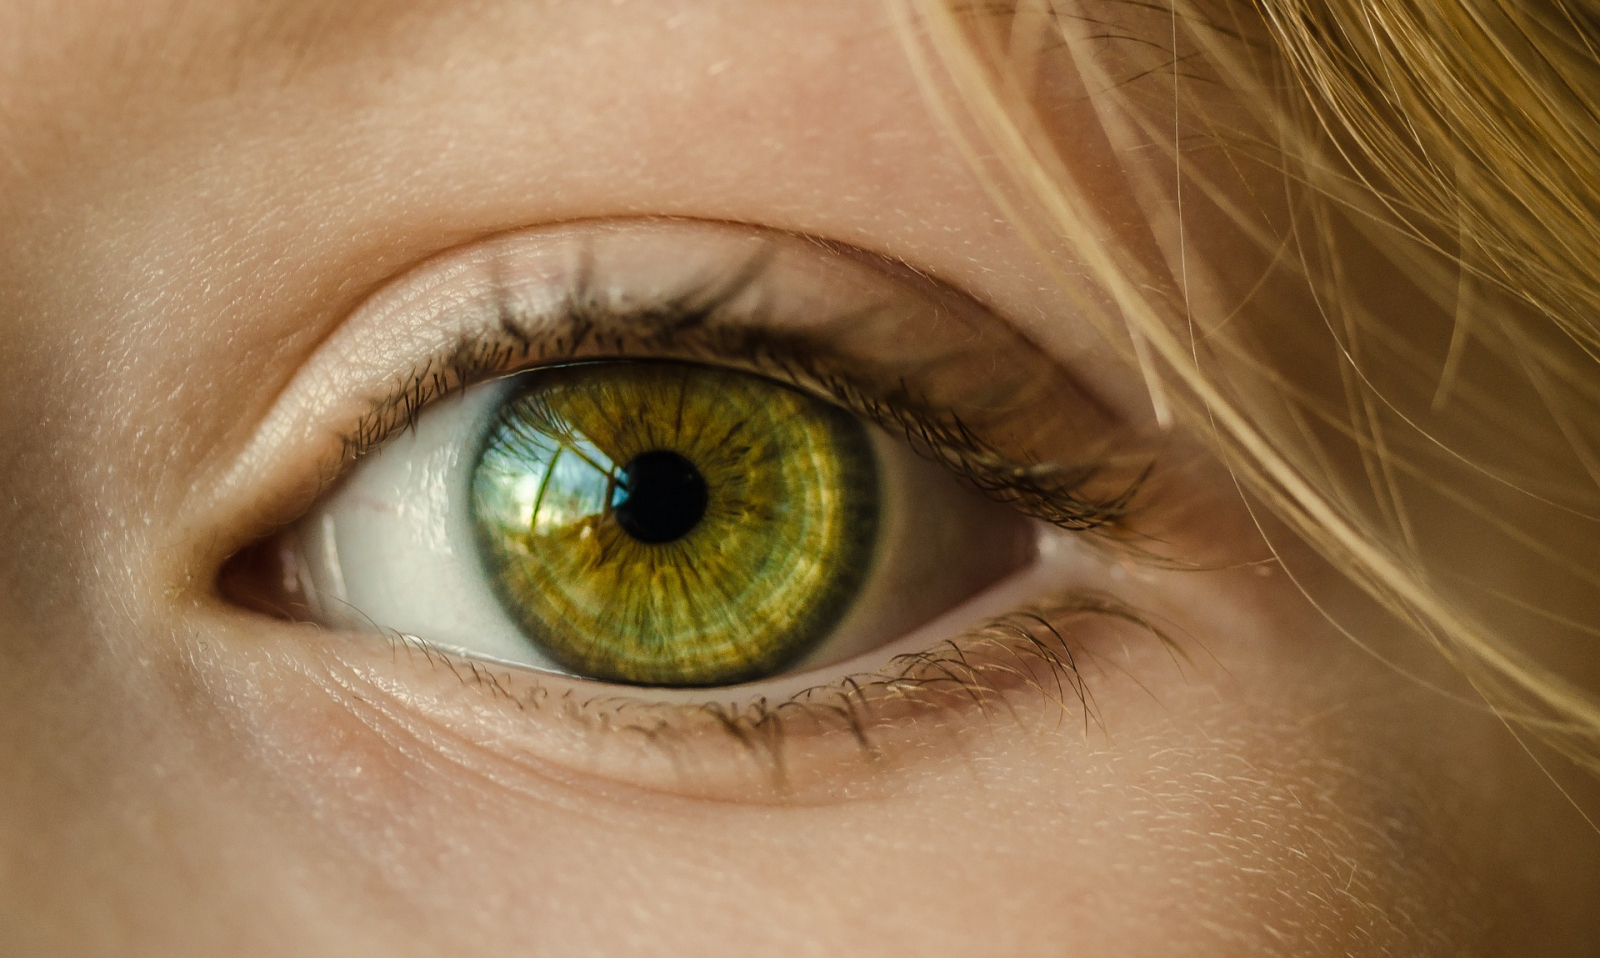 Artificial eye to help correct blurry images